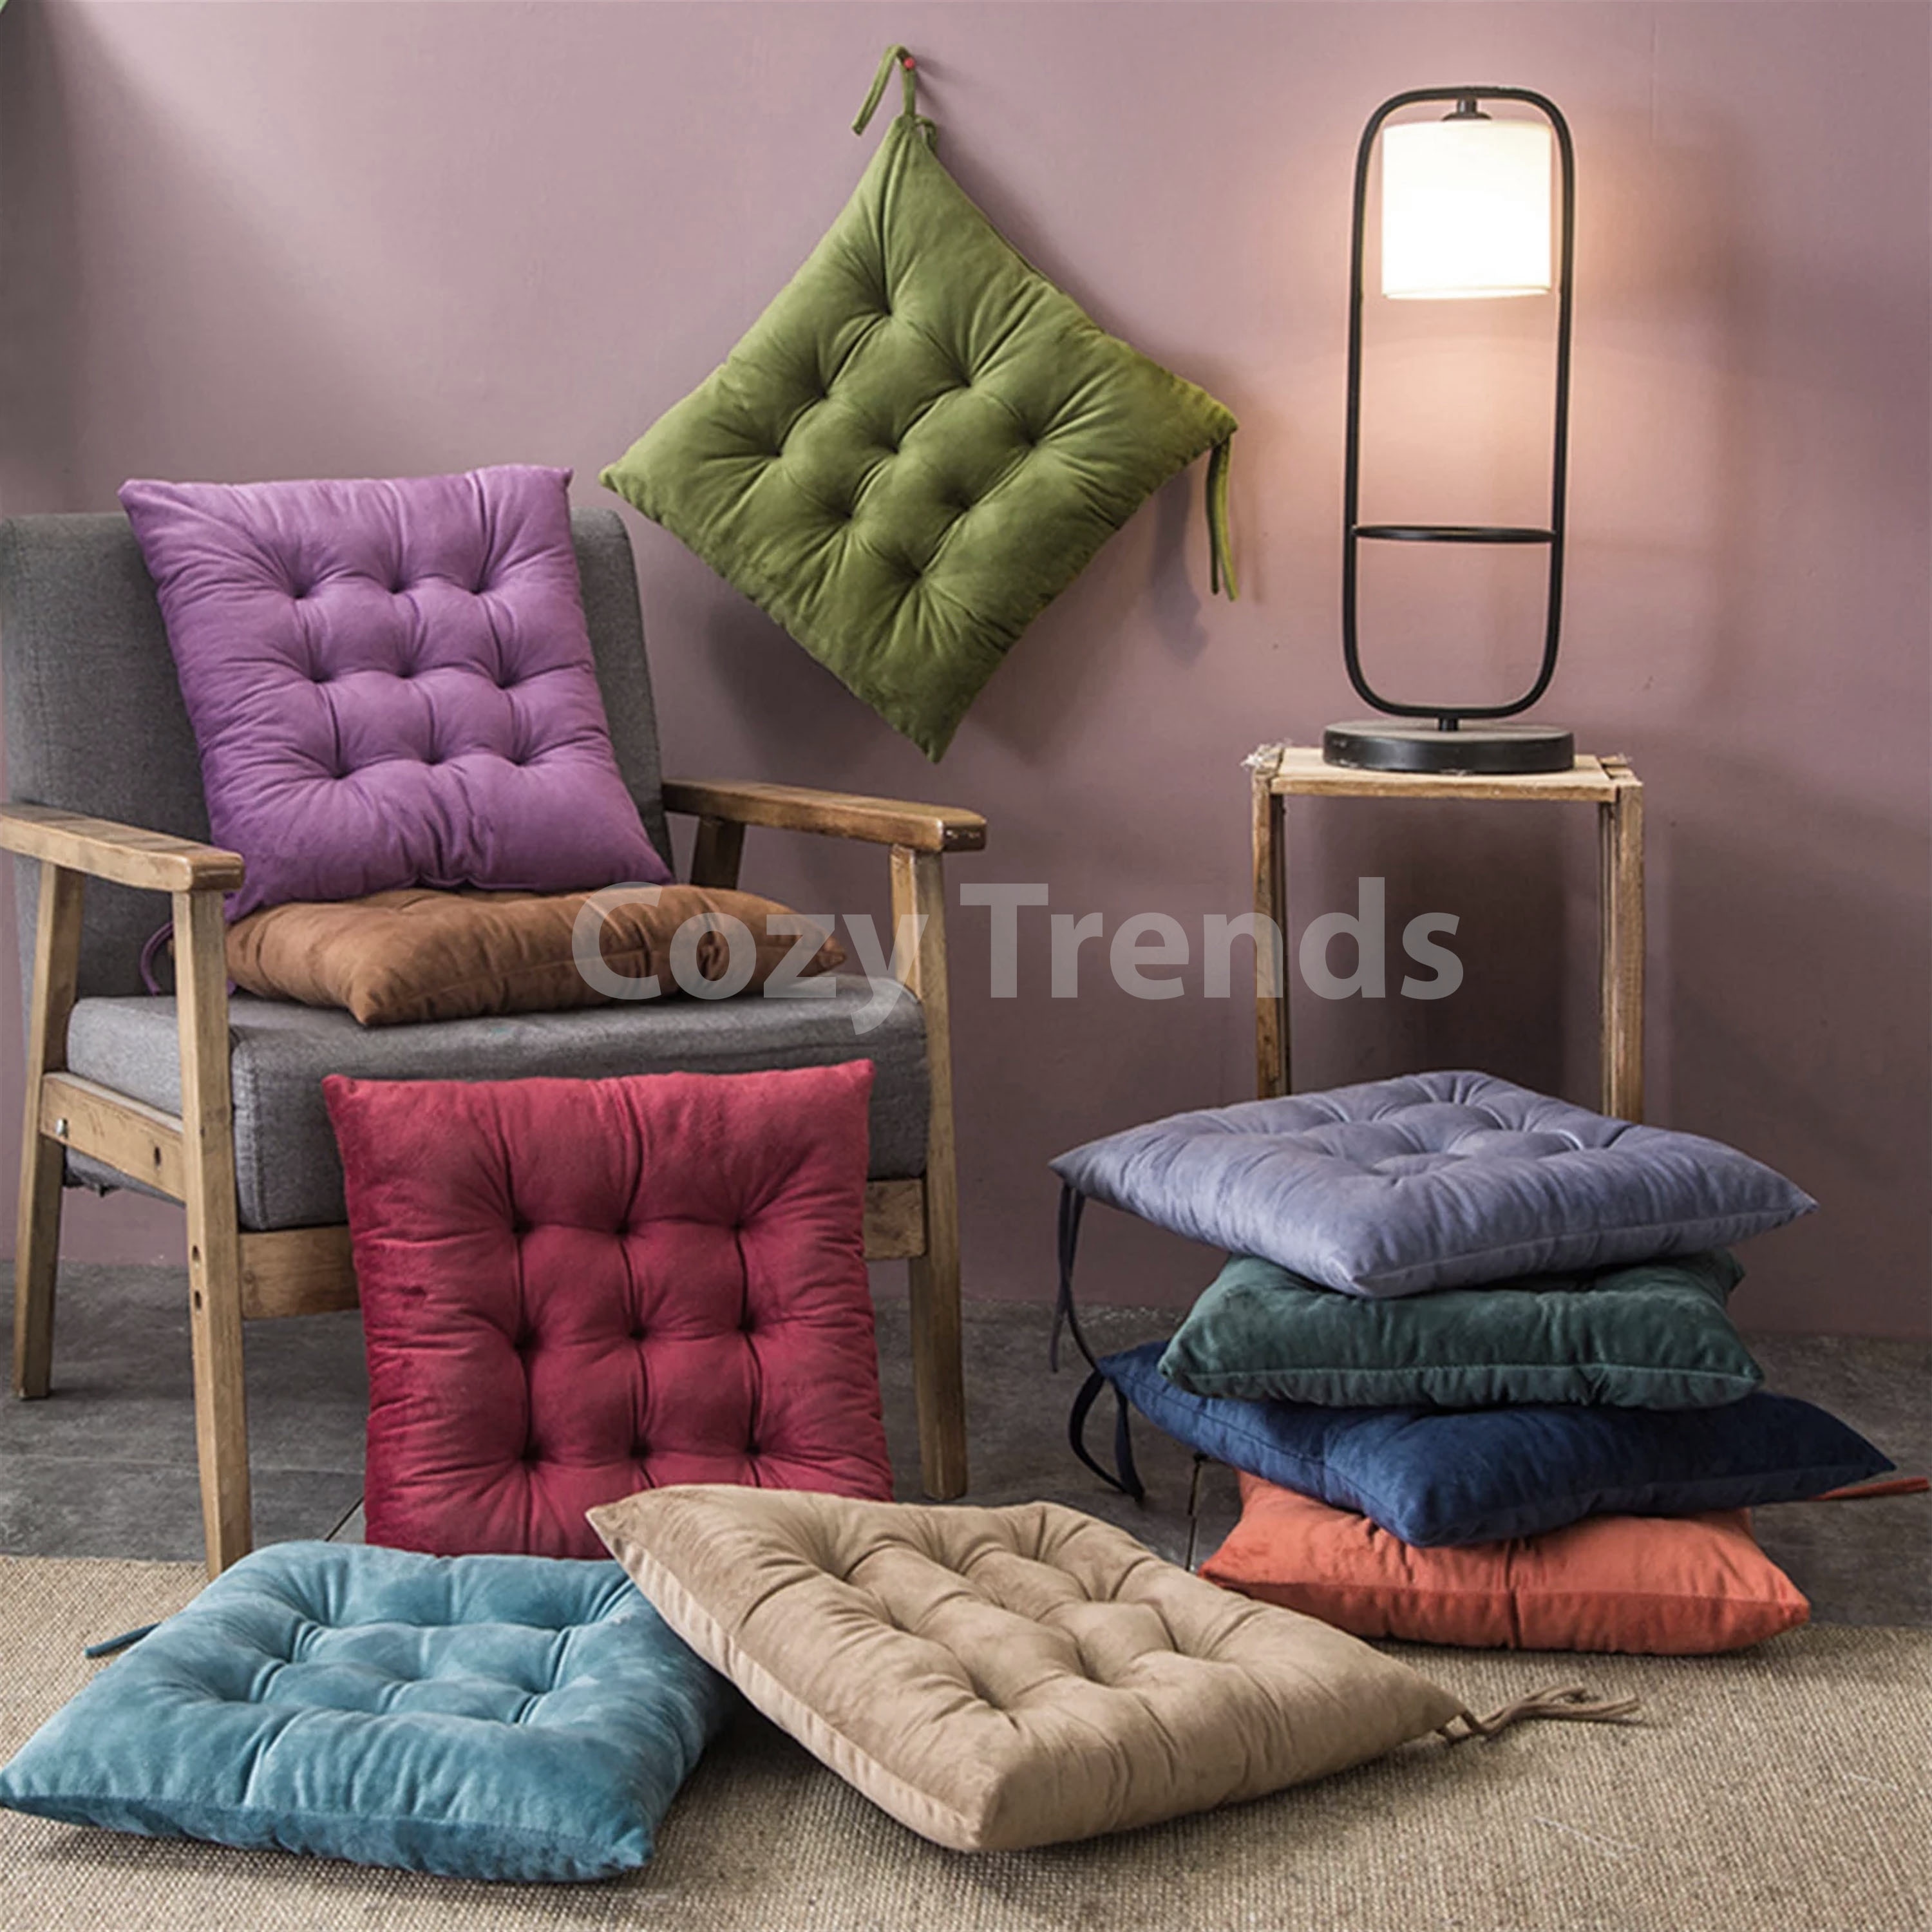 https://ak1.ostkcdn.com/images/products/is/images/direct/f295cb5eb40c1a9a1c1cba8e2e51fdee03863452/Handmade-Velvet-Chair-Seat-Pads-Cushions-with-Ties---Tufted---16%27%27x16%27%27-by-Cozy-Trends%E2%84%A2.jpg